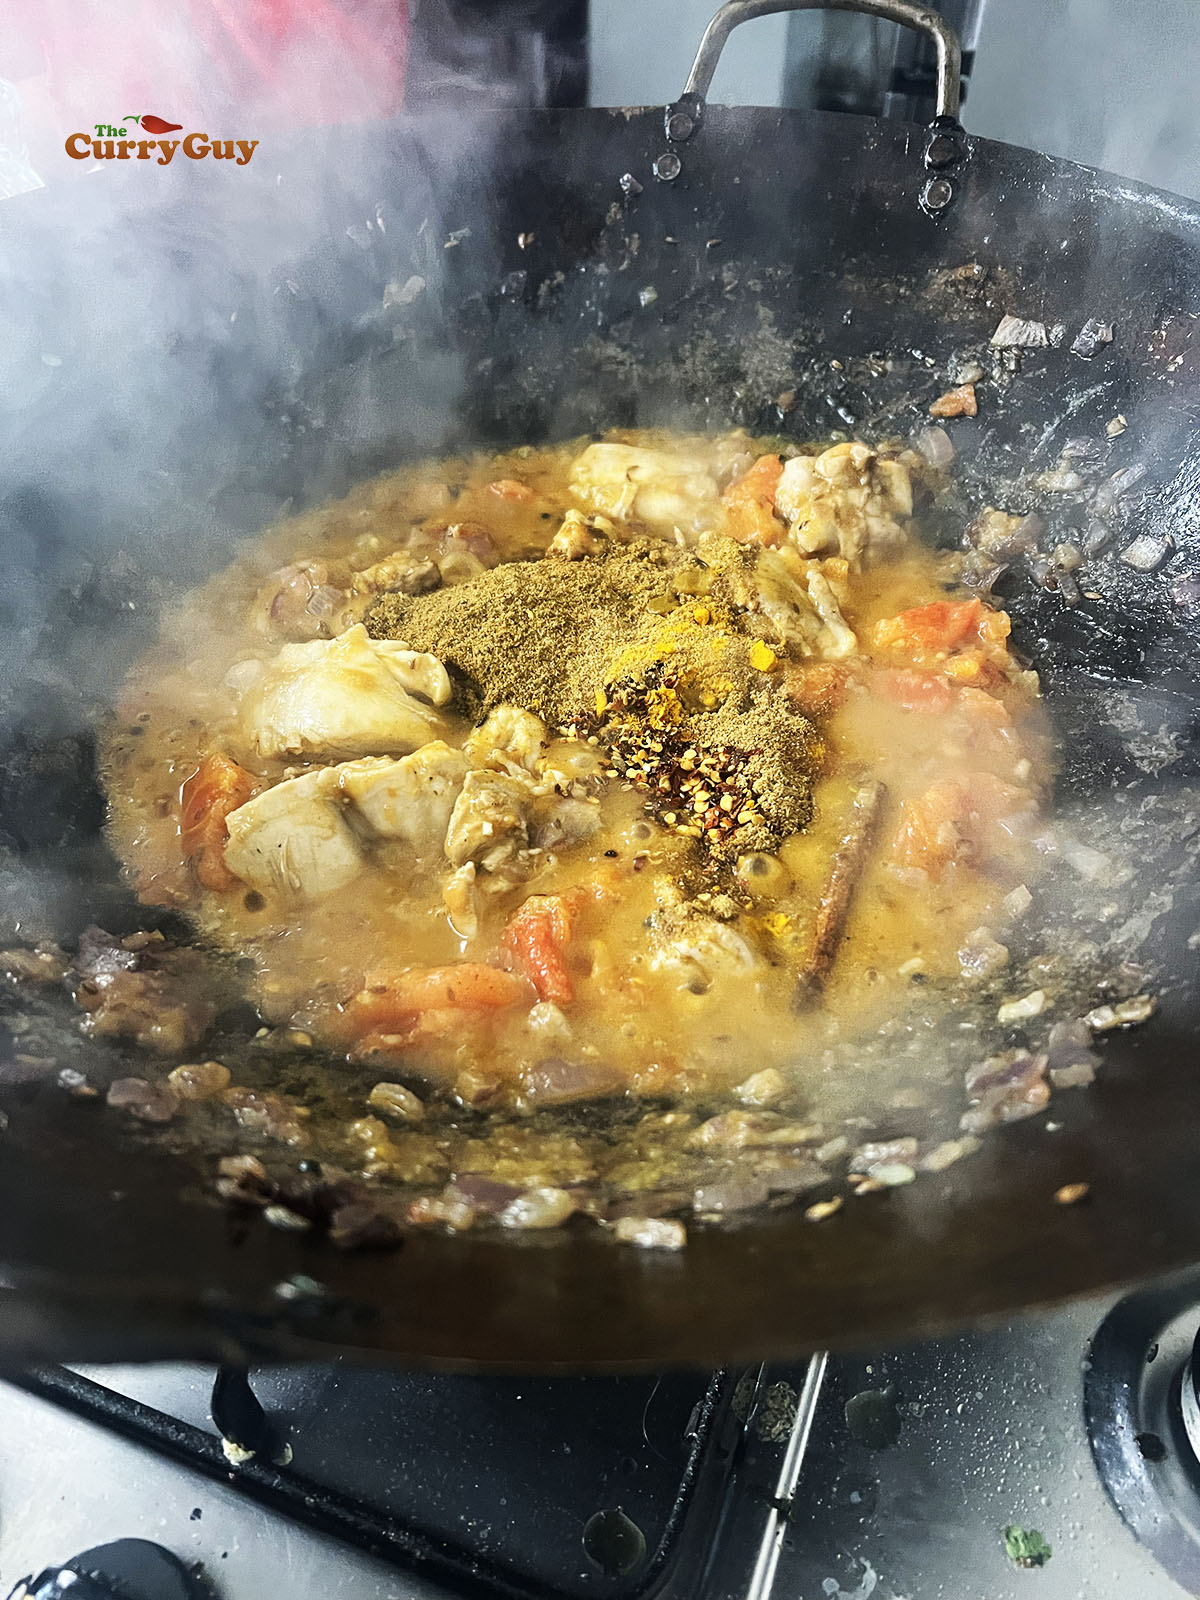 Simmering the curry over a high heat.